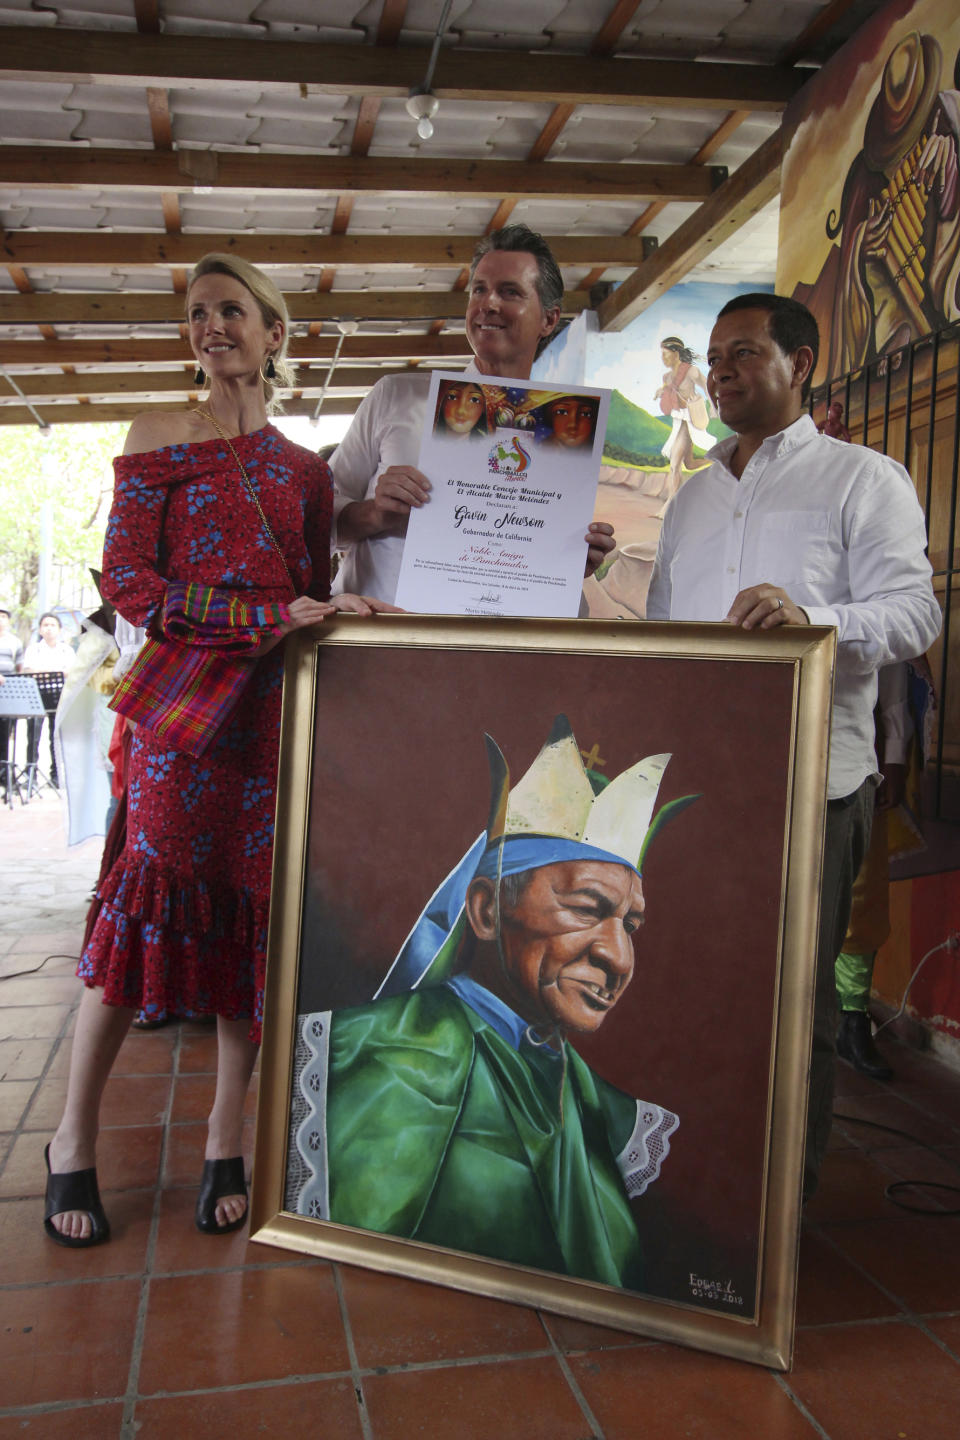 California Gov. Gavin Newsom and his wife, Jennifer Siebel Newsom, are accompanied by Panchimalco Mayor, Mario Melendez, as they pose for the local media with one of the gifts received by the couple on their visit in Panchimalco, El Salvador, Monday, April 8, 2019. The painting called "The Story Teller," is part of the traditional culture of this small town. (AP Photo/Salvador Melendez)